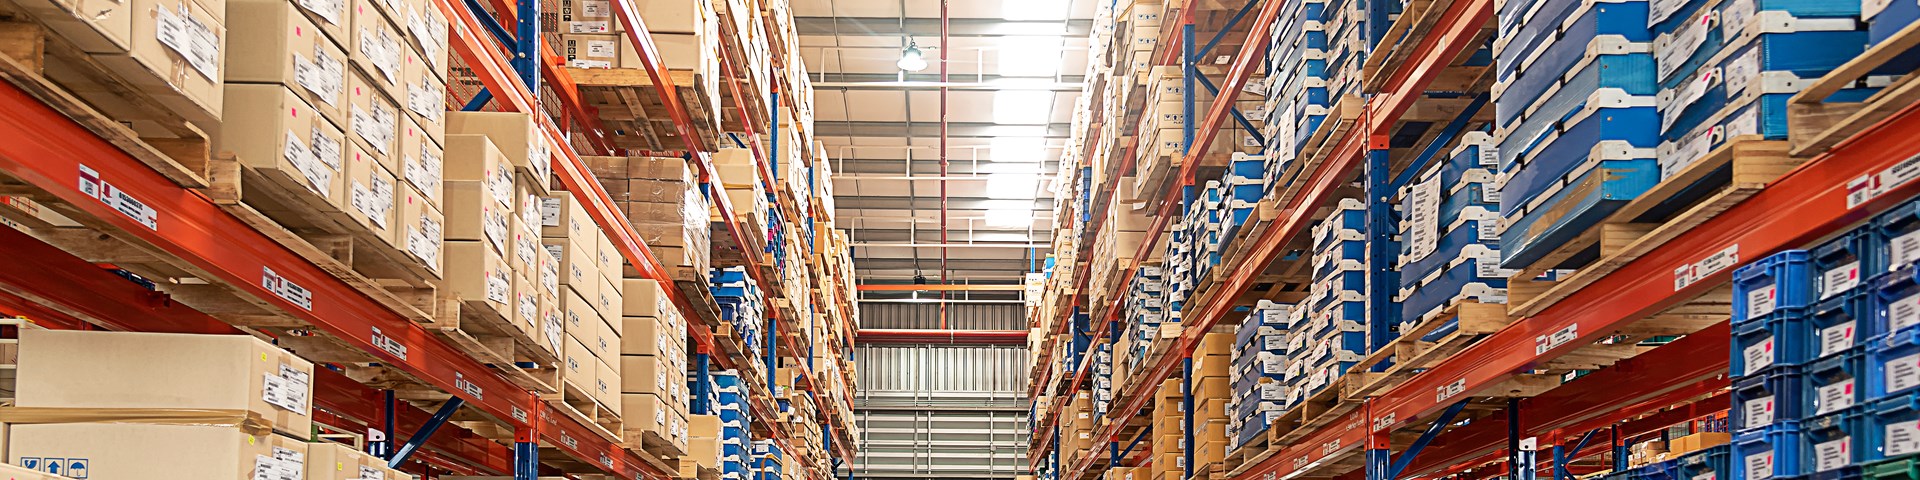 large warehouse stacked full of customer parcels